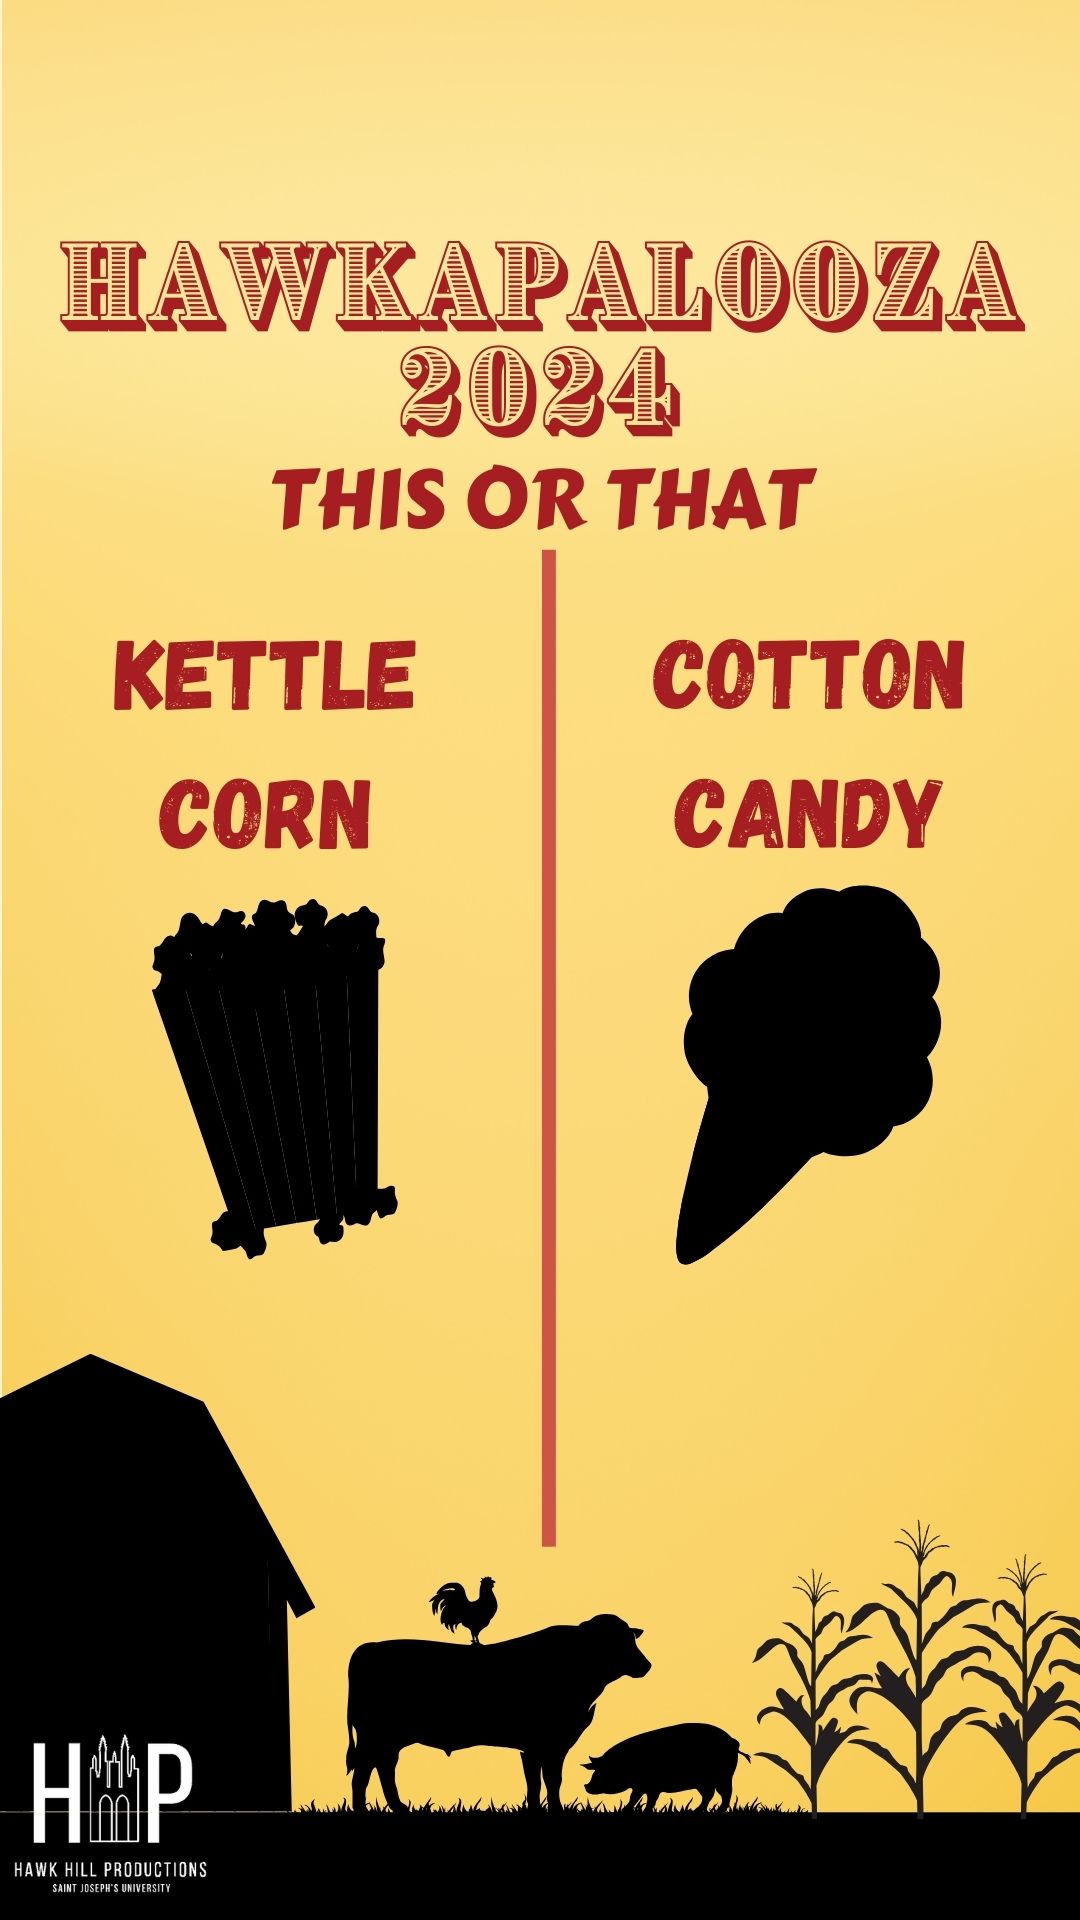 This is an instagram story with a yellow background that says 'Hawkapalooza This or that' and features two sides of the screen where you can either choose kettle corn or cotton candy. At the bottom of the image there are silhouettes of a barn, farm animals and a ferris wheel.